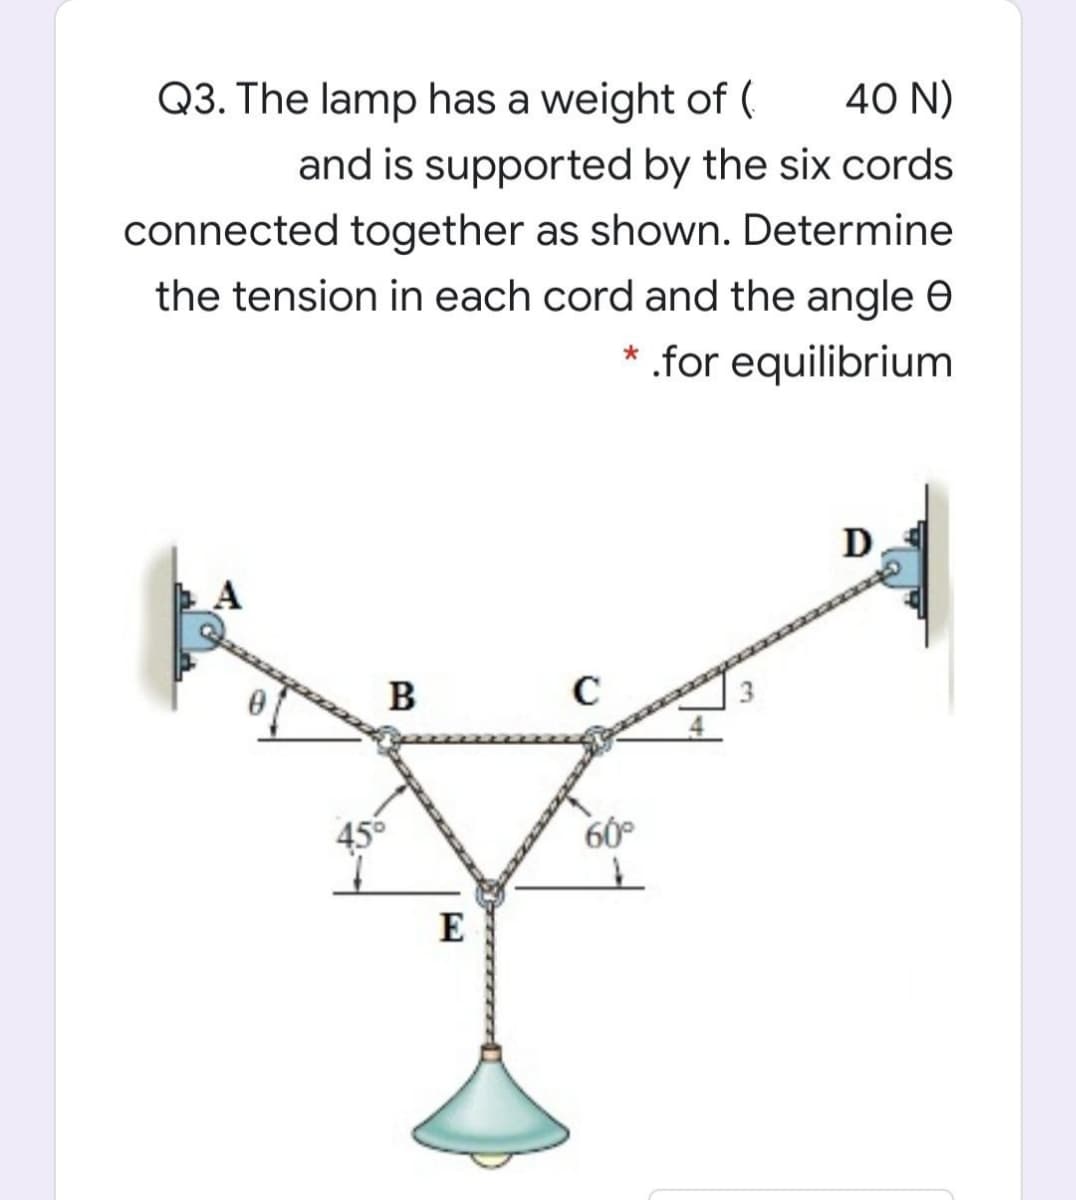 Q3. The lamp has a weight of (
40 N)
and is supported by the six cords
connected together as shown. Determine
the tension in each cord and the angle e
* .for equilibrium
D.
B
C
456
60°
E
